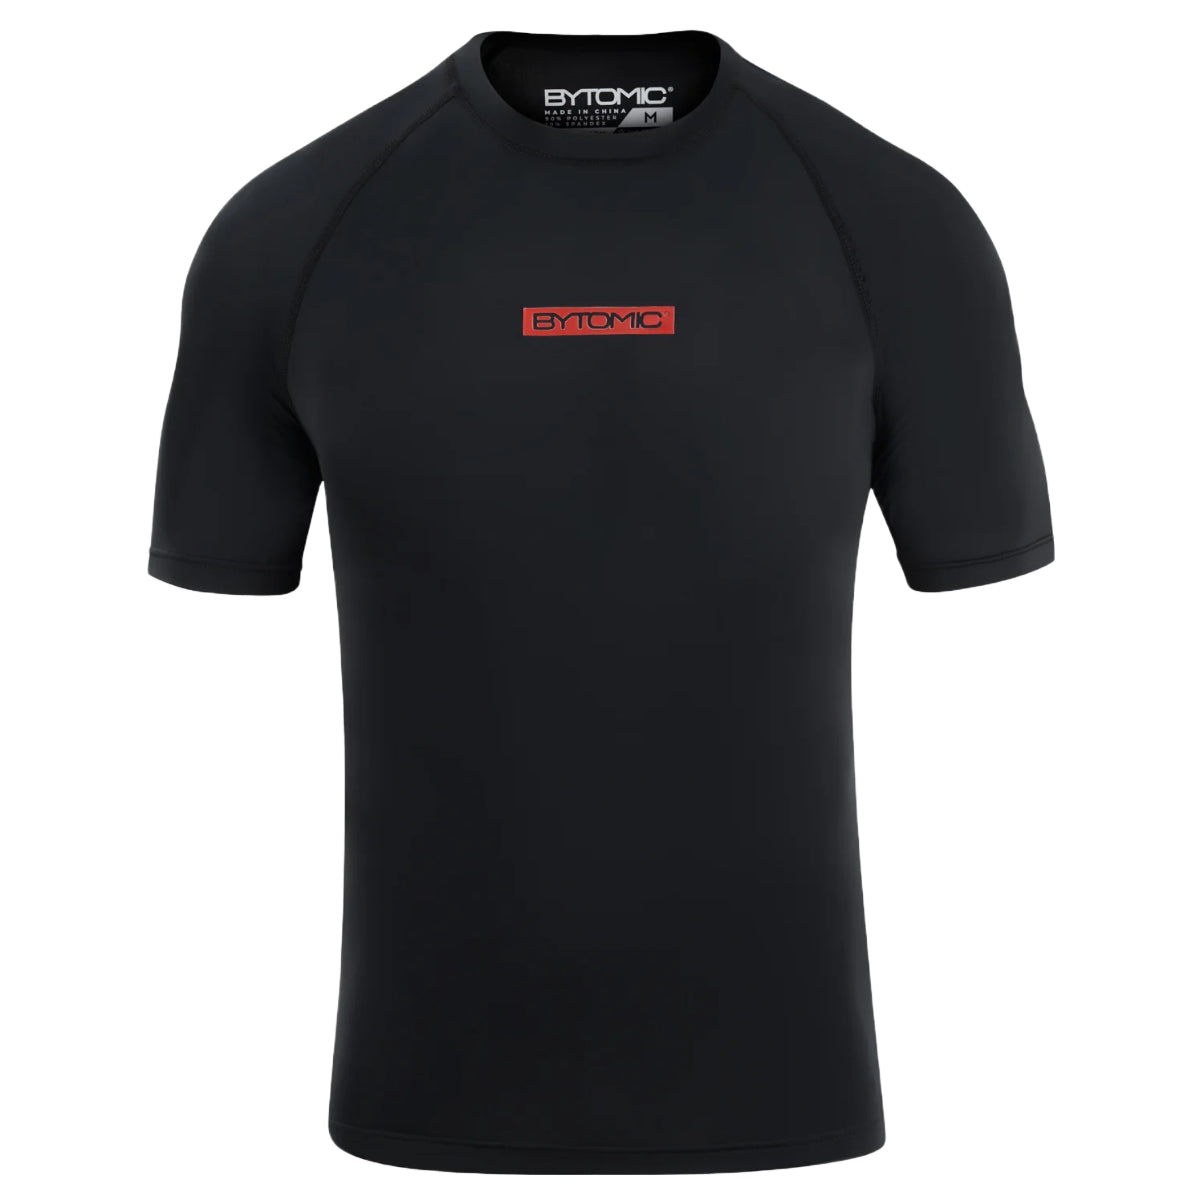 Bytomic Red Label Short Sleeve Rash Guard from Made4Fighters